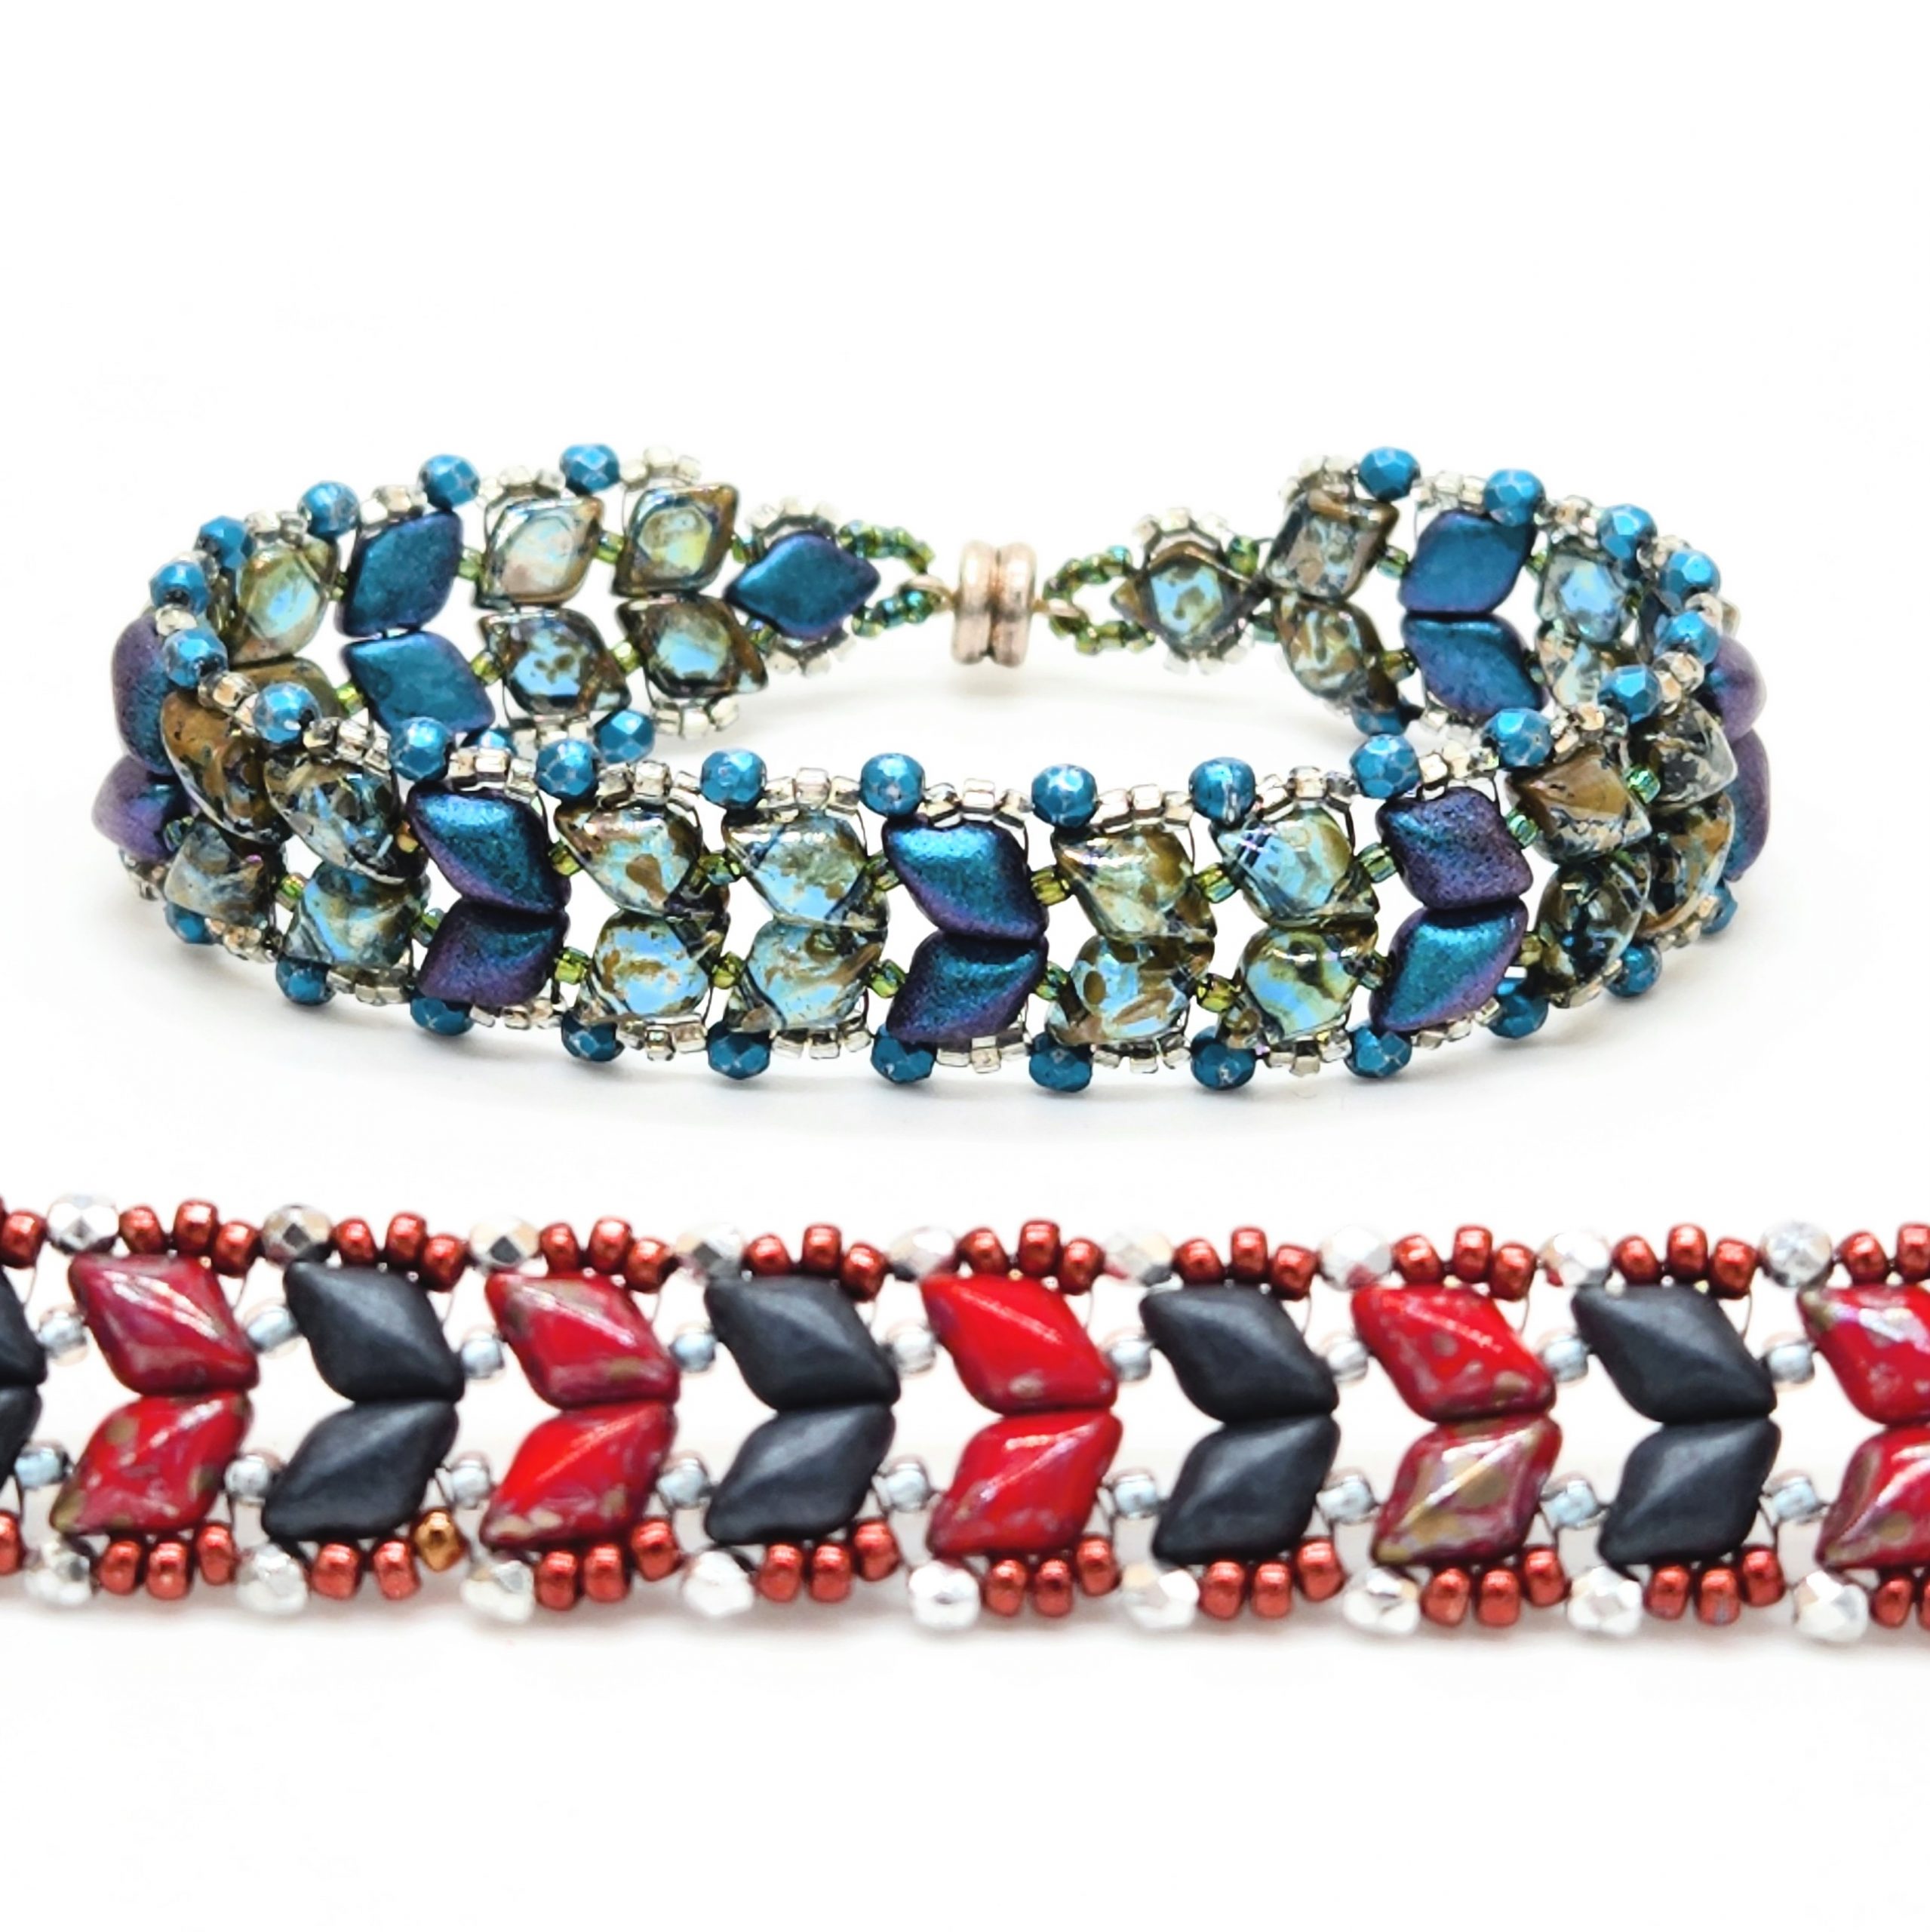 Dragon Scale Cuff Bracelet – Beaded Creations by Leah